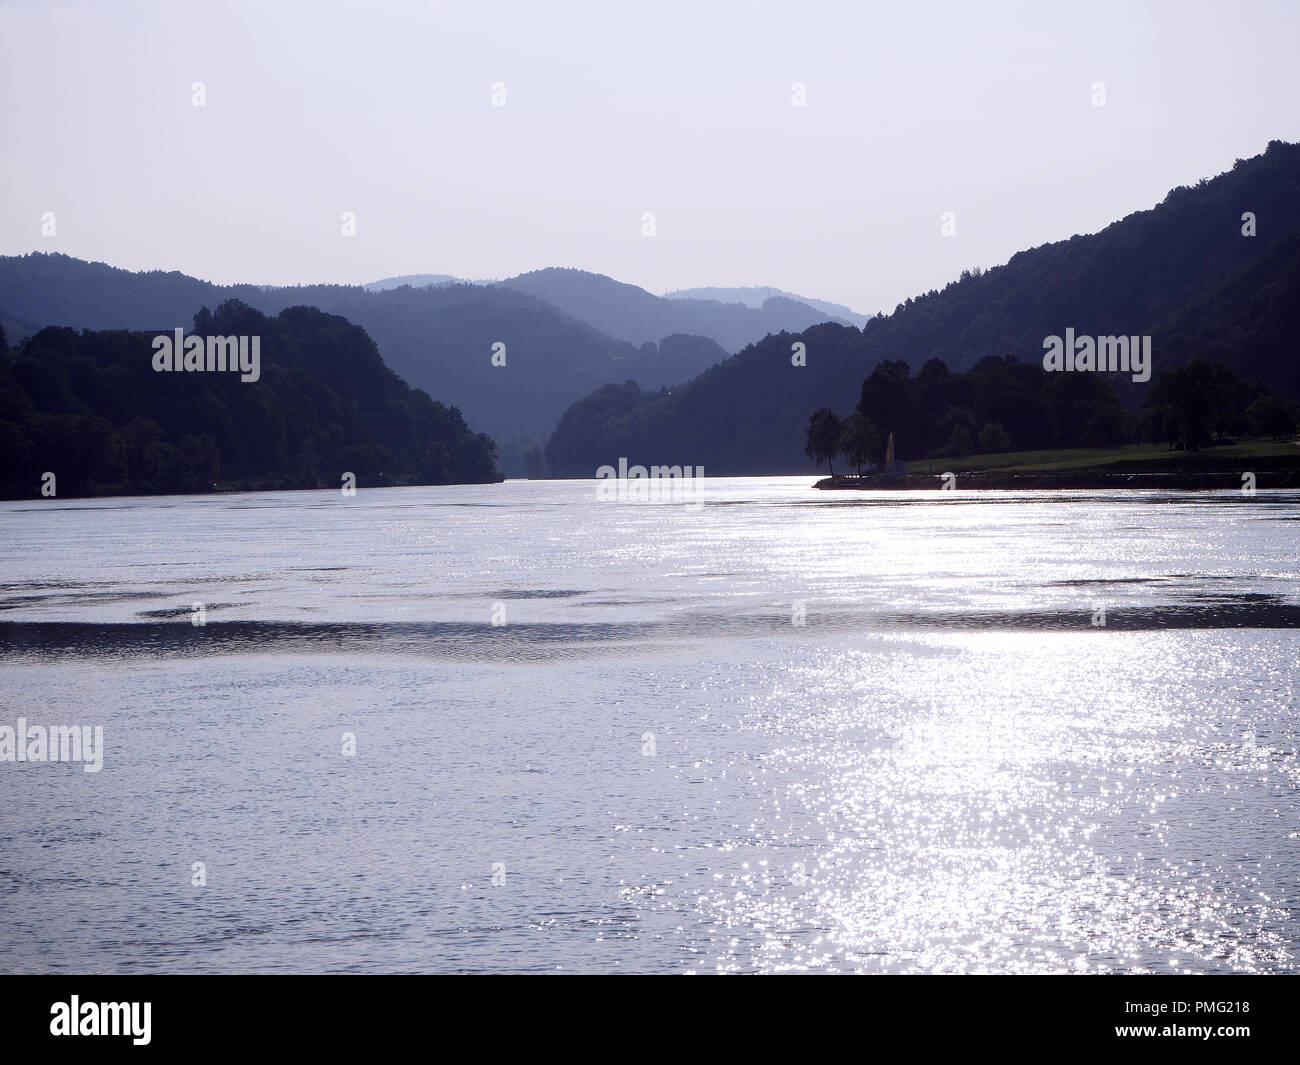 Danube River after sunset in austria, grein surrounded by mountains Stock Photo